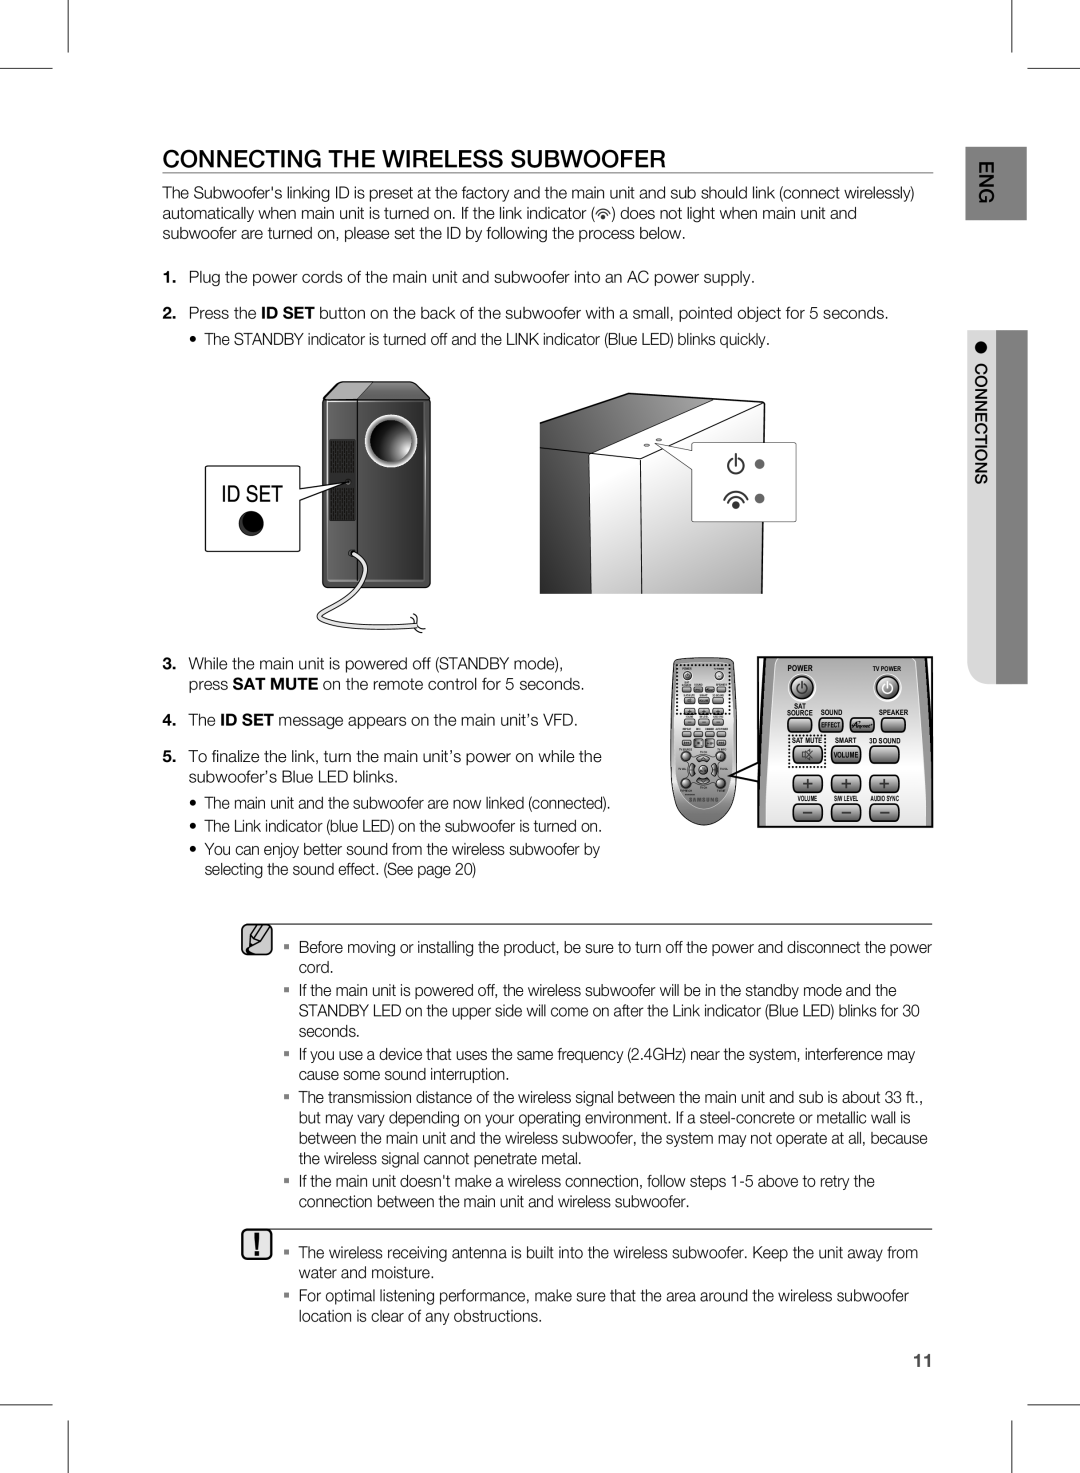 Samsung HW-E450 user manual CONNECTING THE WIrElESS SUBWOOFEr 